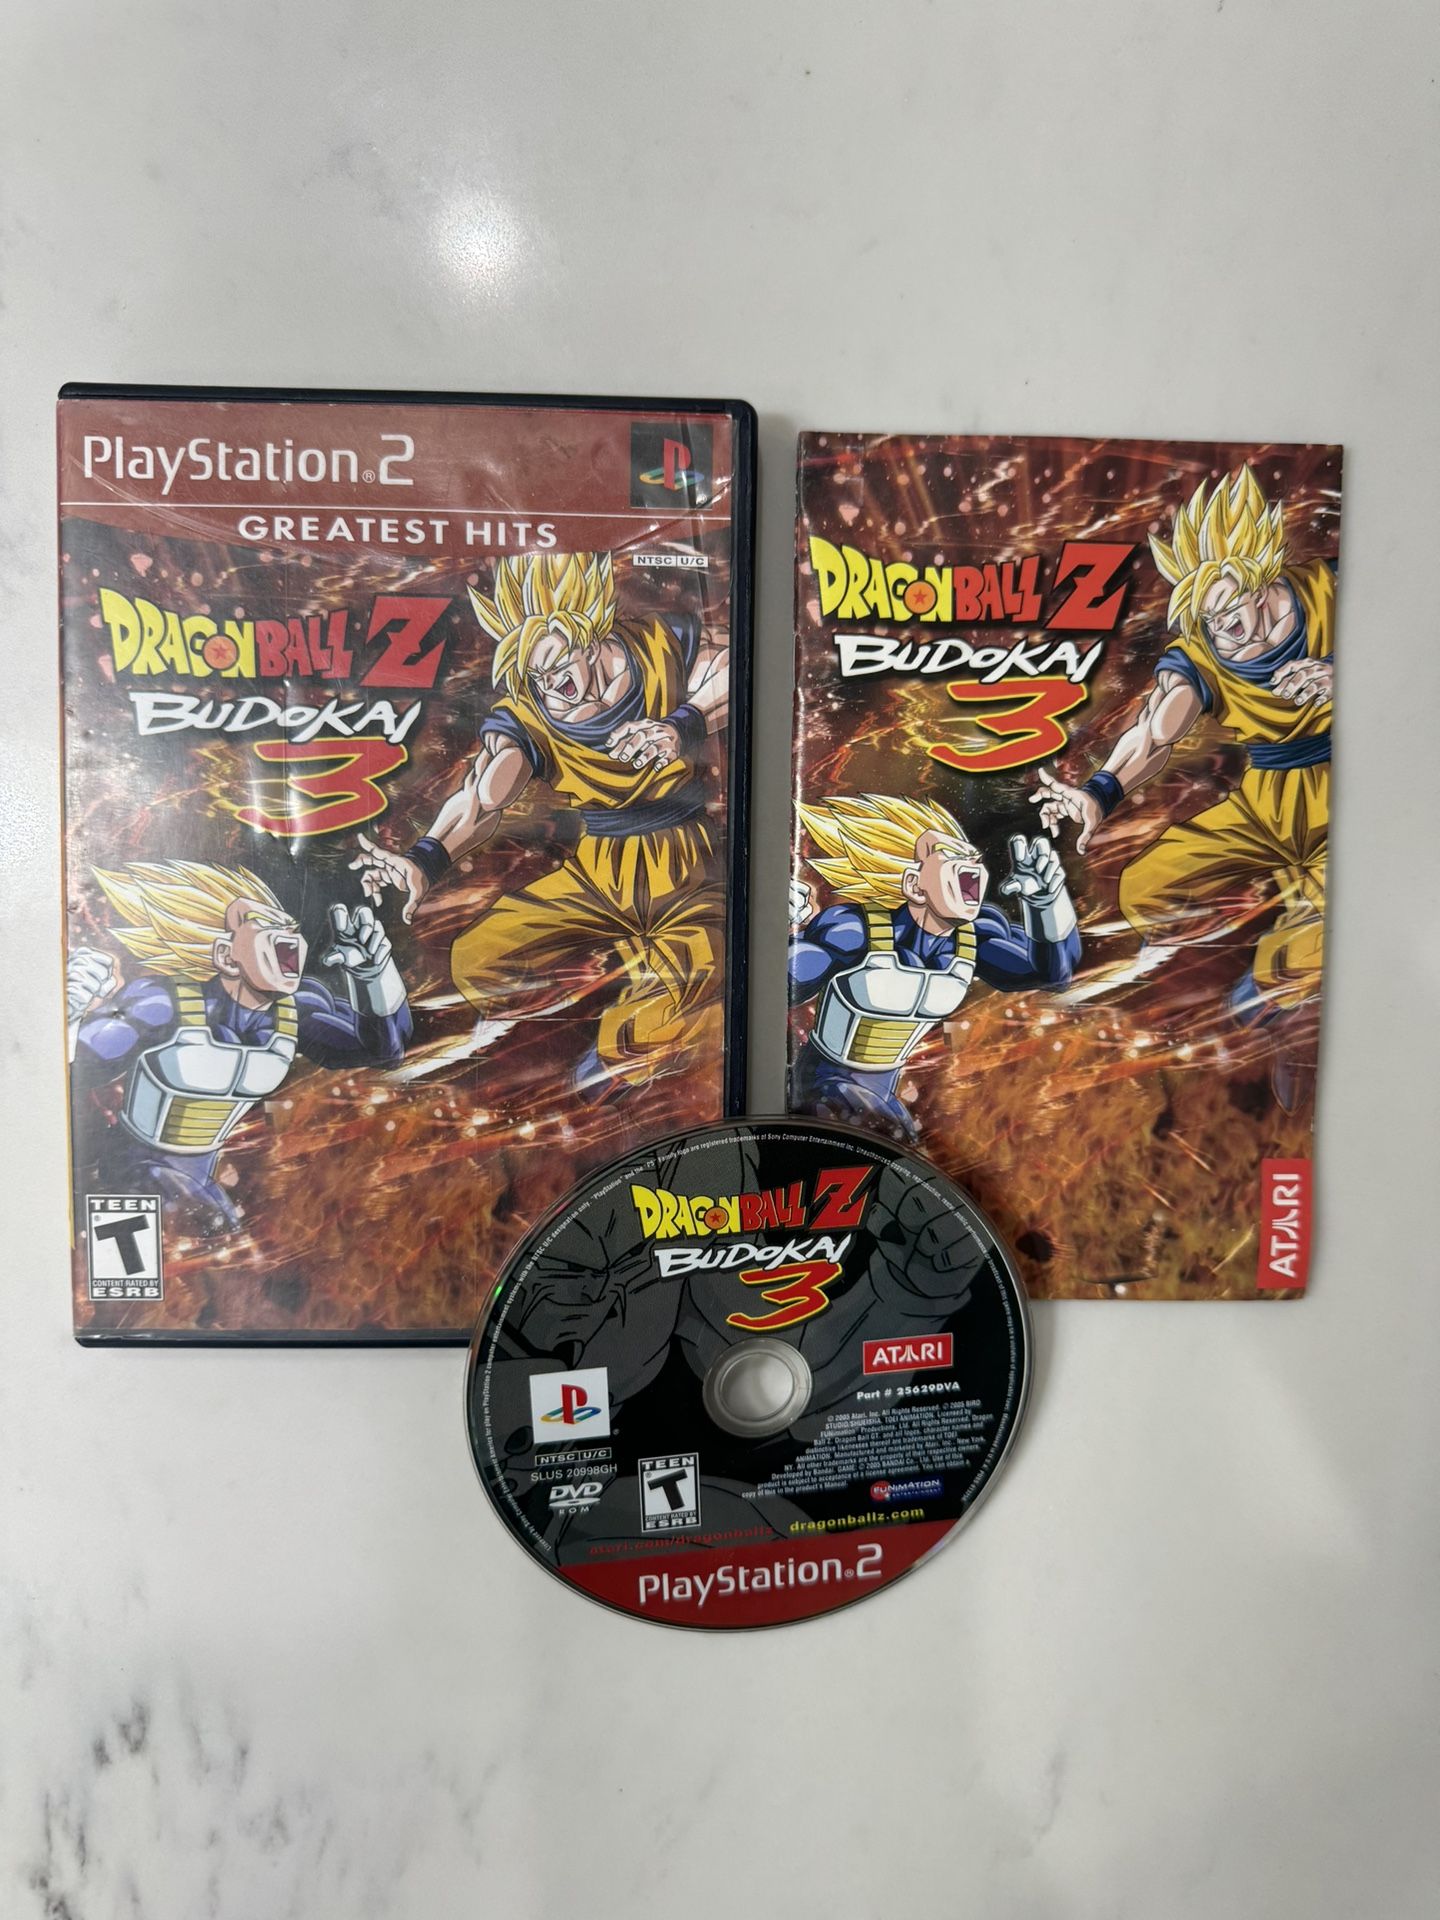 Dragon Ball Z Budokai 3 Scratch-Less Disc for PlayStation 2 PS2 GAME